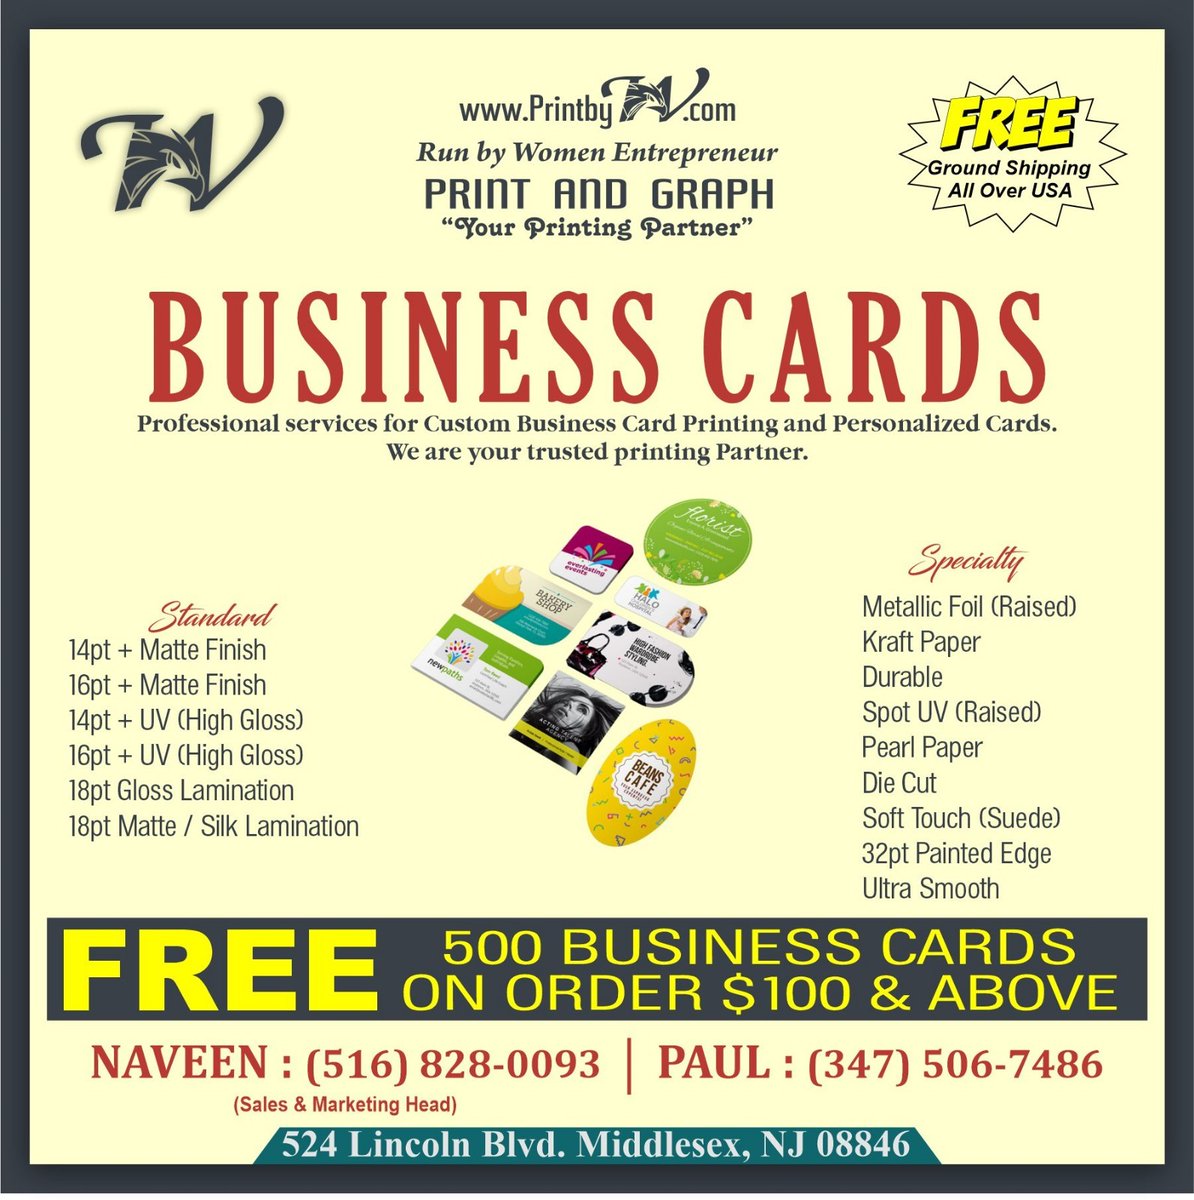 PrintbyW: Your trusted partner for standout business cards that leave a lasting impression. . Get More Information Visit Us printbyw.com . . Tags #PrintbyWQuality #TrustedPrintingPartner #BusinessCards #Flyers #essentials #printbyw #printandgraph #newyork #us